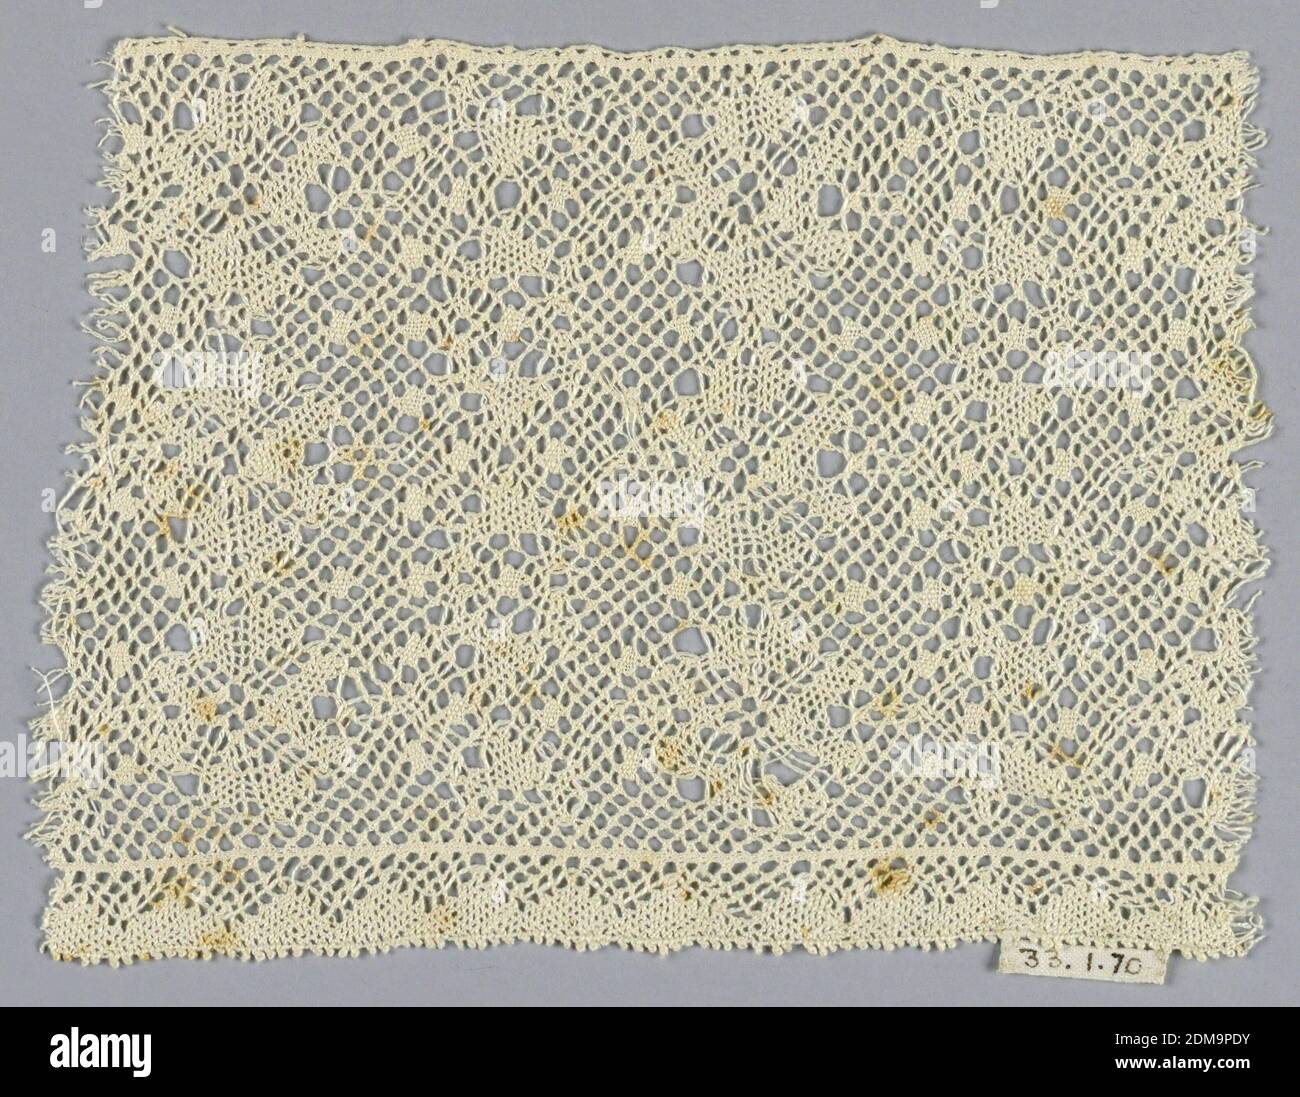 Fragment, Medium: linen Technique: bobbin lace made in Lille style with twisted ground and NO heavy outlining thread, This has a torchon ground which is two pairs passing through each other and followed by twisting., Northern Italy, 19th century, lace, Fragment Stock Photo